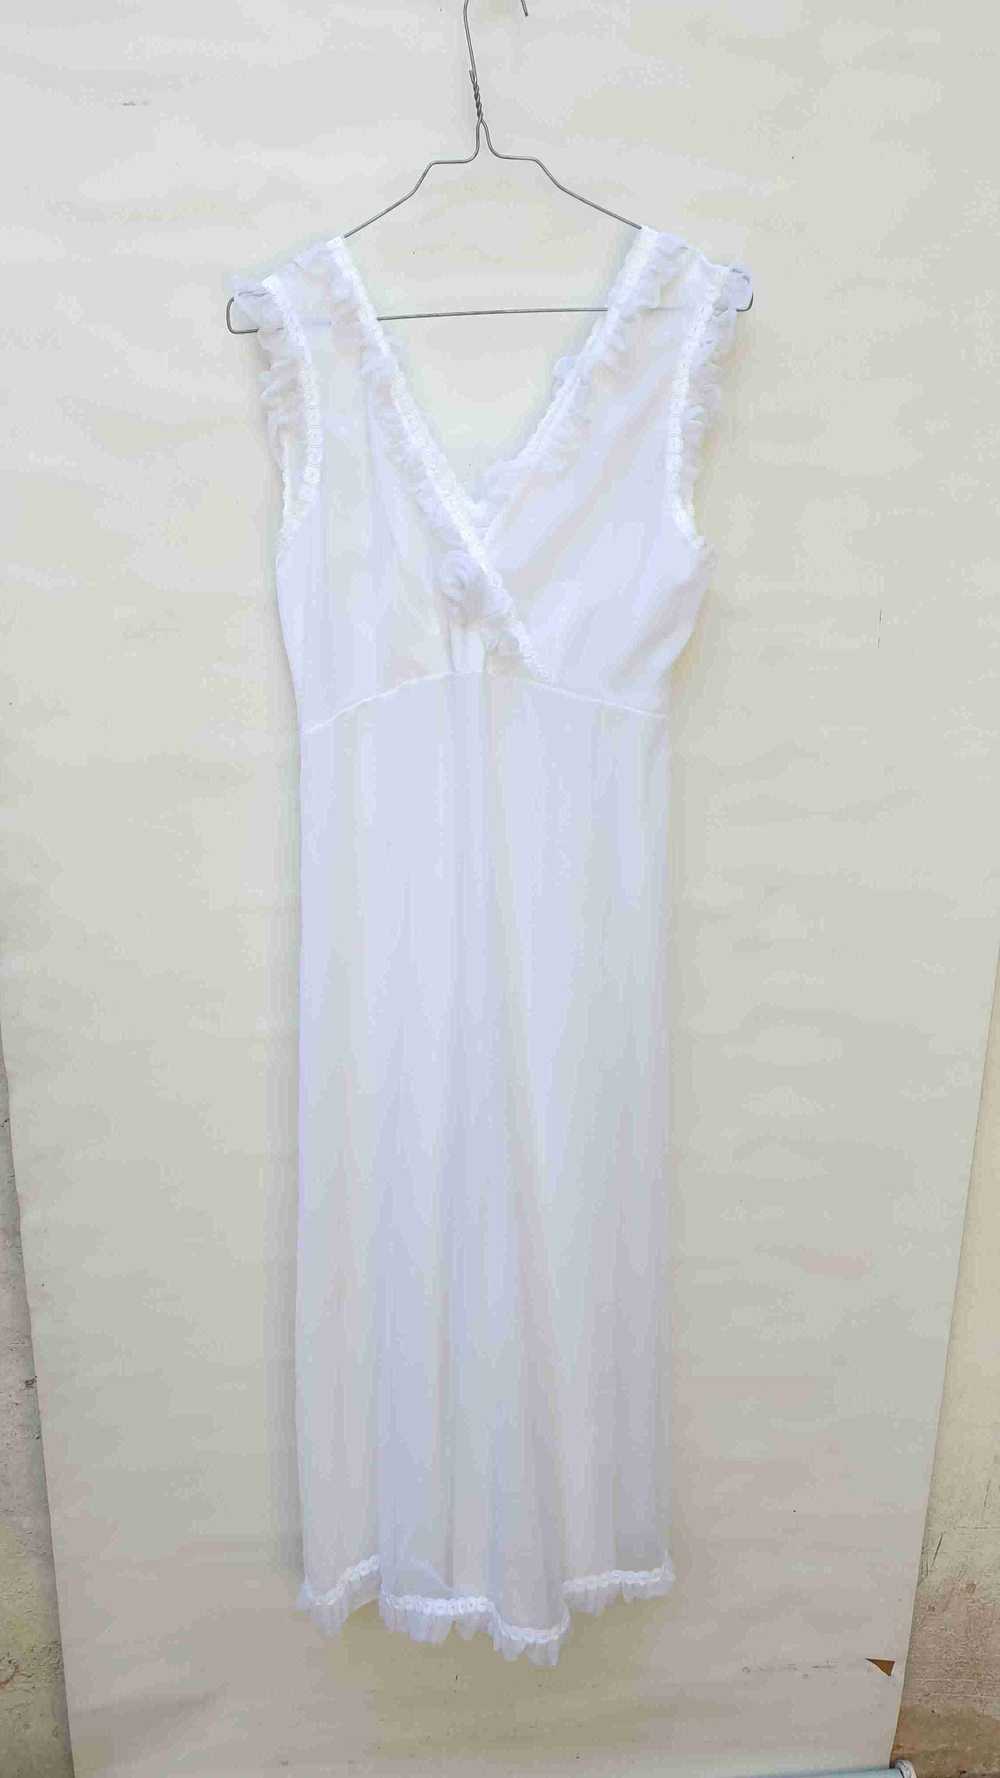 70's negligee - Negligee complete with its 70s ni… - image 2